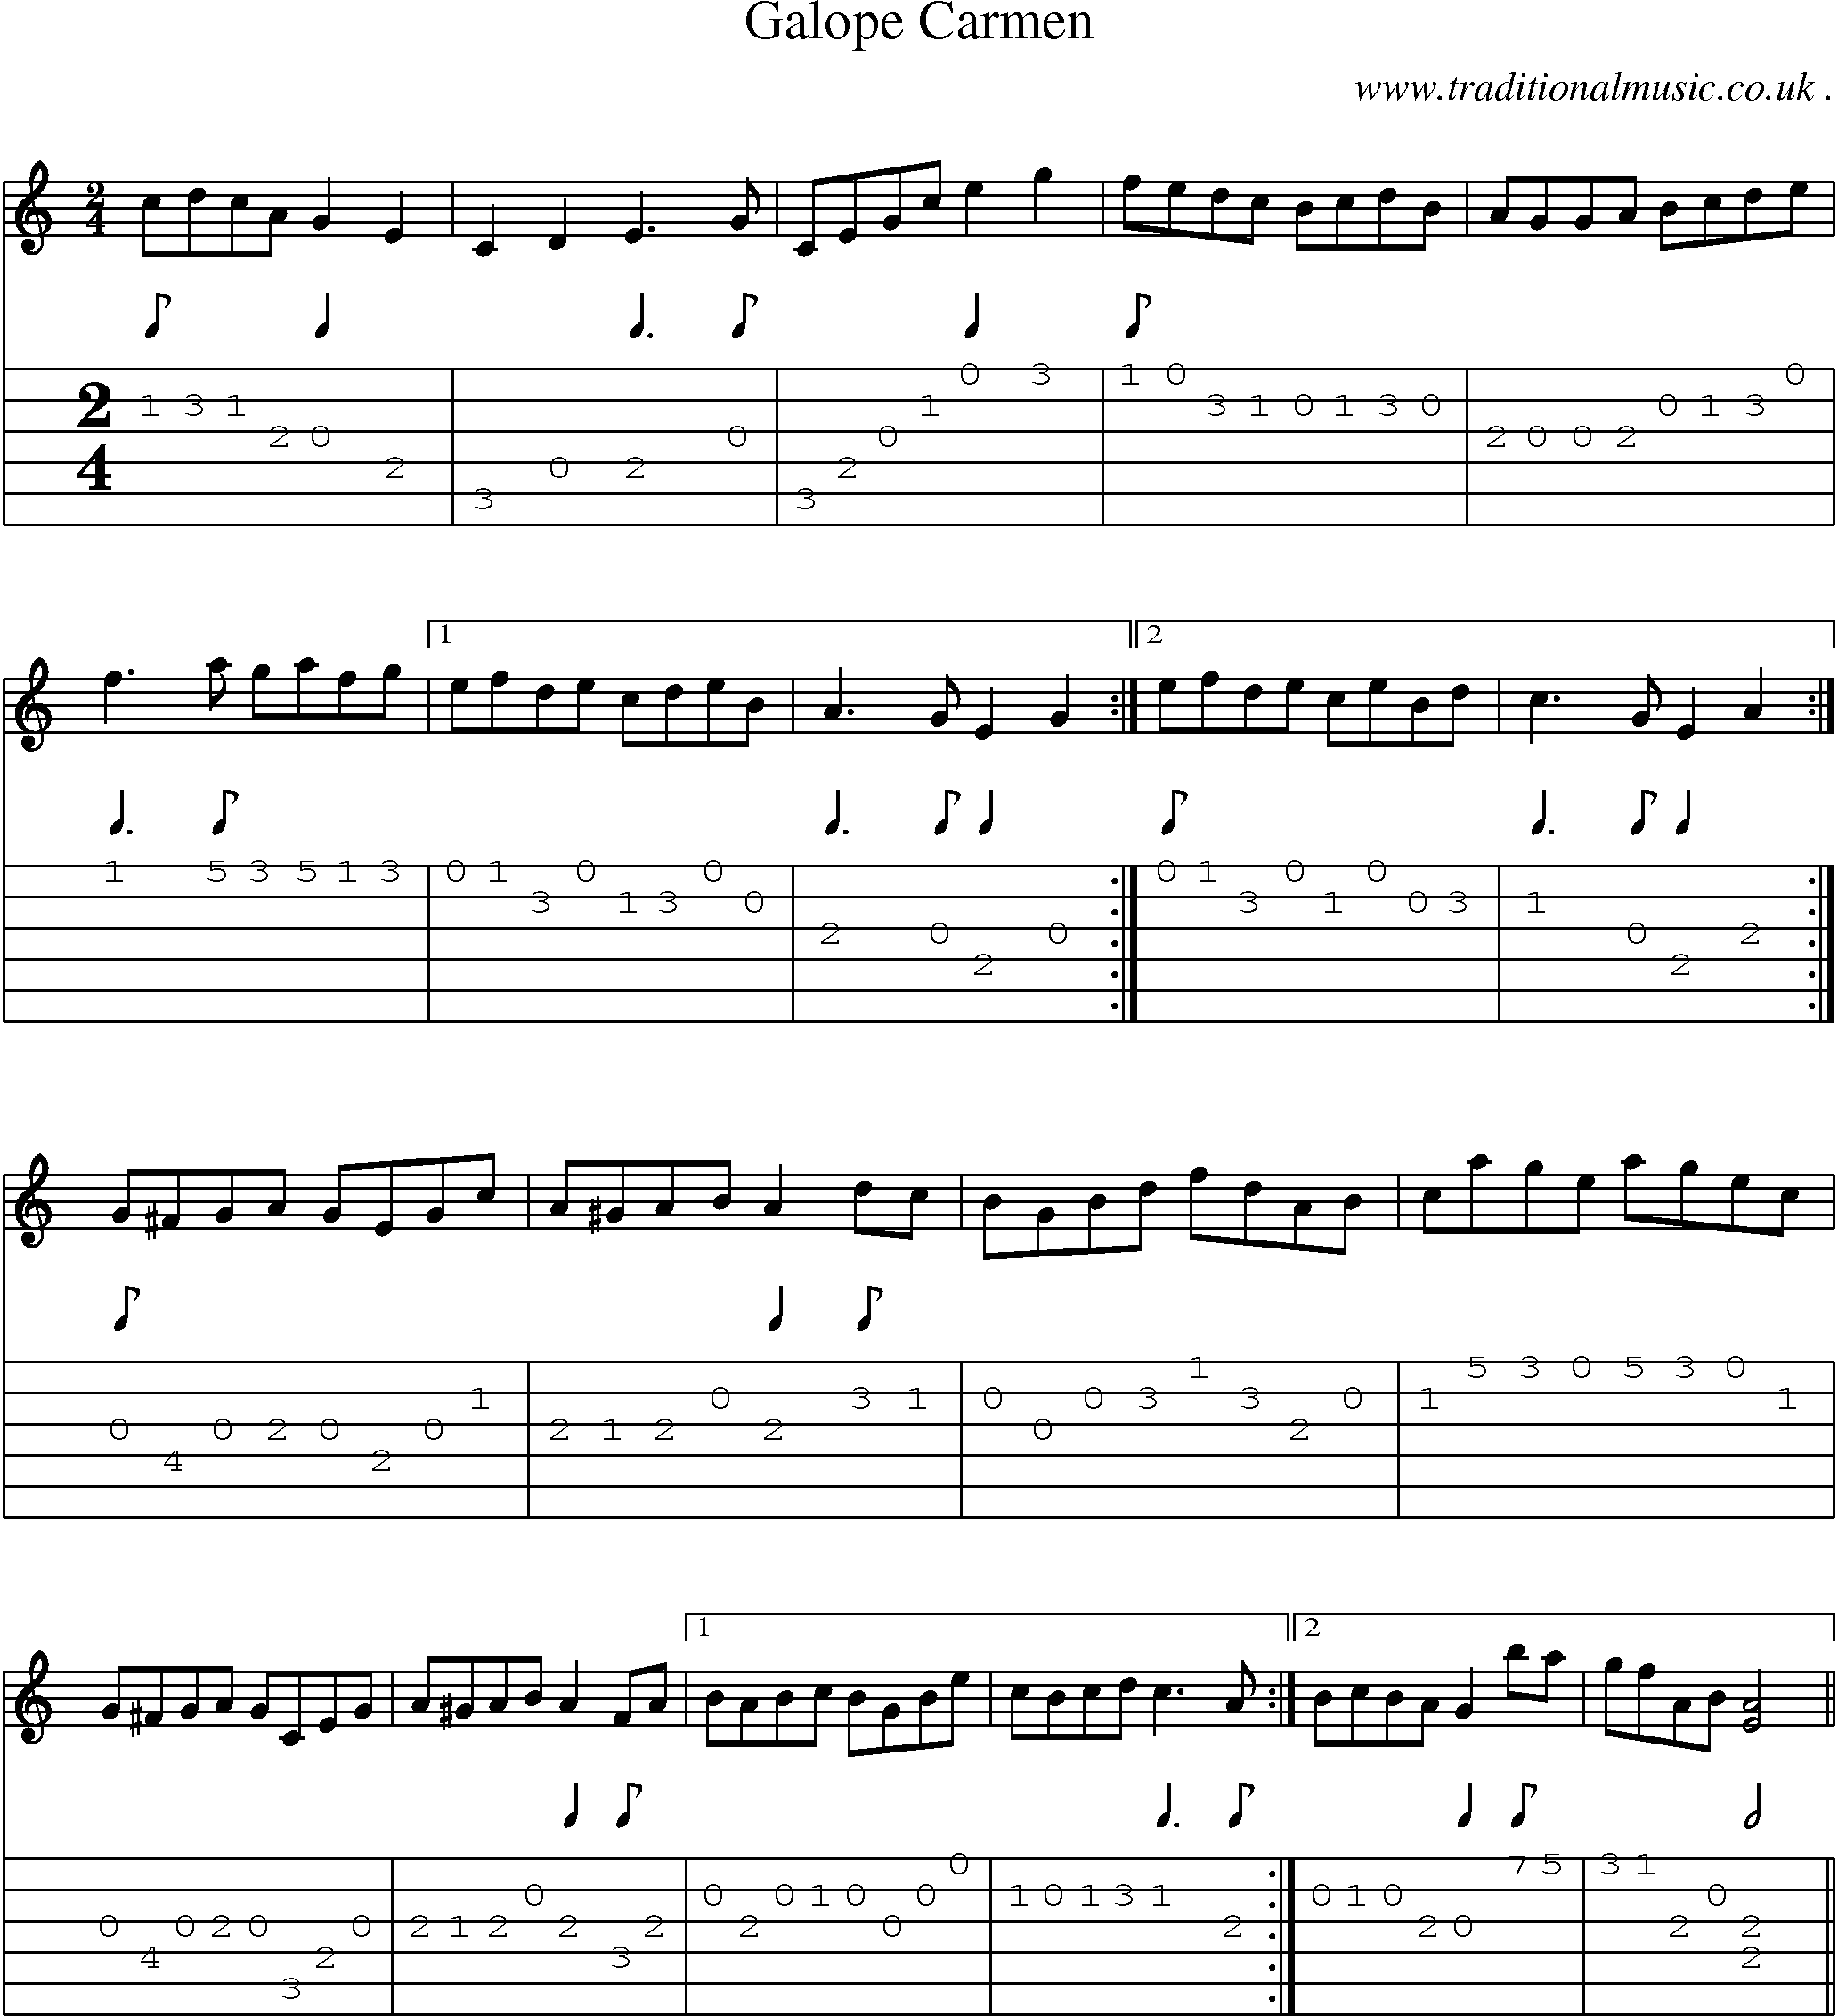 Sheet-Music and Guitar Tabs for Galope Carmen